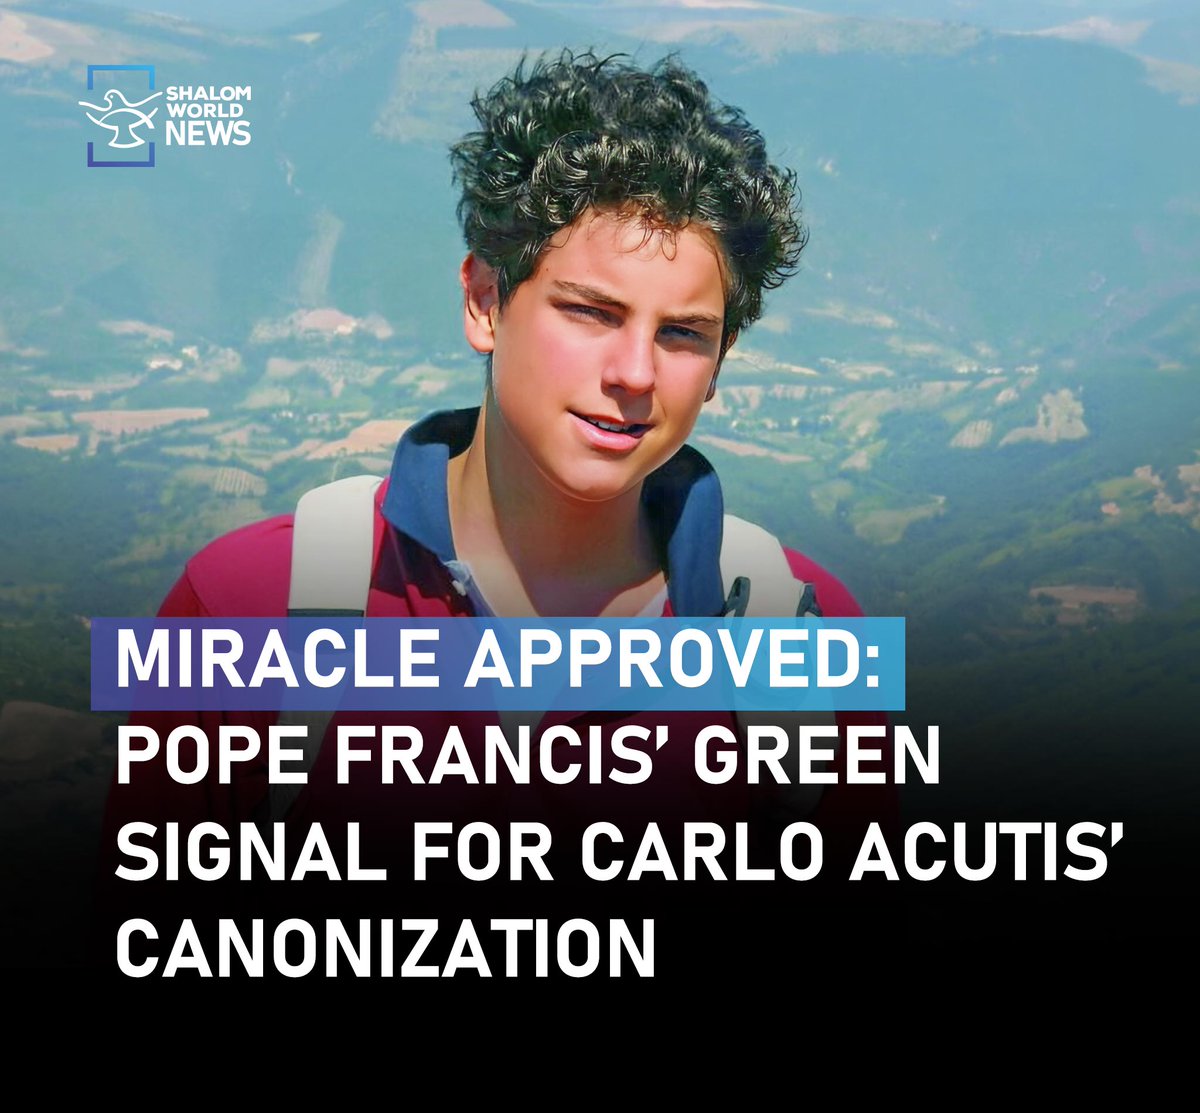 The path is cleared for the first cyber-era saint in the history of the Catholic Church!Pope Francis has recognized a miracle attributed to Blessed Carlo Acutis,clearing his path to sainthood.
#saint #blessedannouncement #CarloAcutis #PopeFranics  #ShalomWorldNews #newsspecial